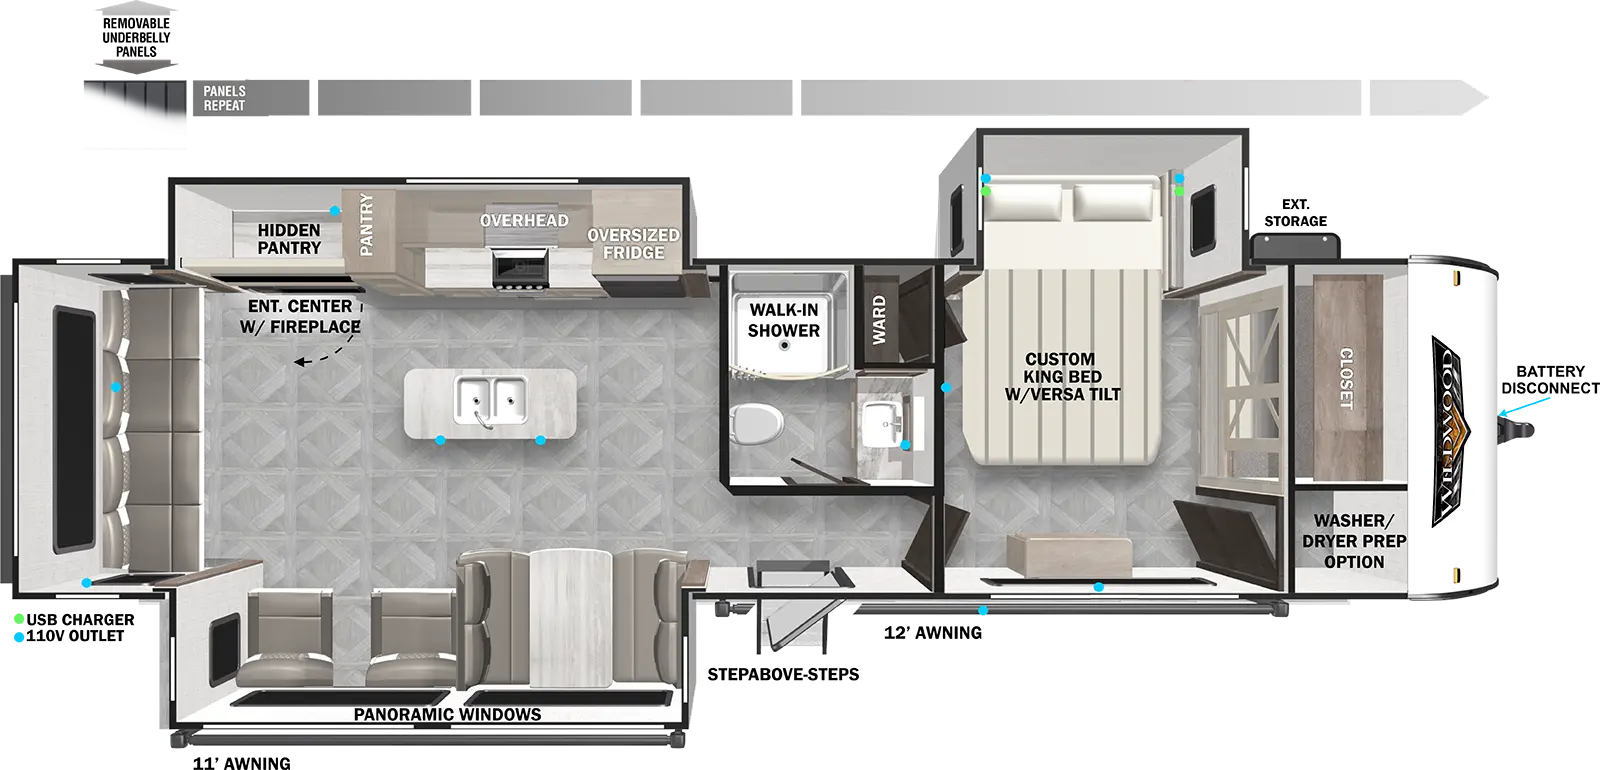 The 32RET has three slideouts and one entry. Exterior features include and 11 foot awning and 12 foot awning, step above entry steps, exterior storage, battery disconnect, and removable underbelly panels. Interior layout front to back: closet, optional washer/dryer prep, off-door side custom versa-tilt king bed with versa-tilt slideout, walk-in closet, and door side dresser; off-door side full bathroom with walk-in shower; entry door; off-door side slideout with oversized refrigerator, microwave, overhead cabinet, pantry, and entertainment center with fireplace below and hidden pantry behind; kitchen island with sink; door side slideout with versa lounge/dinette and panoramic windows; rear chairs and end table. 